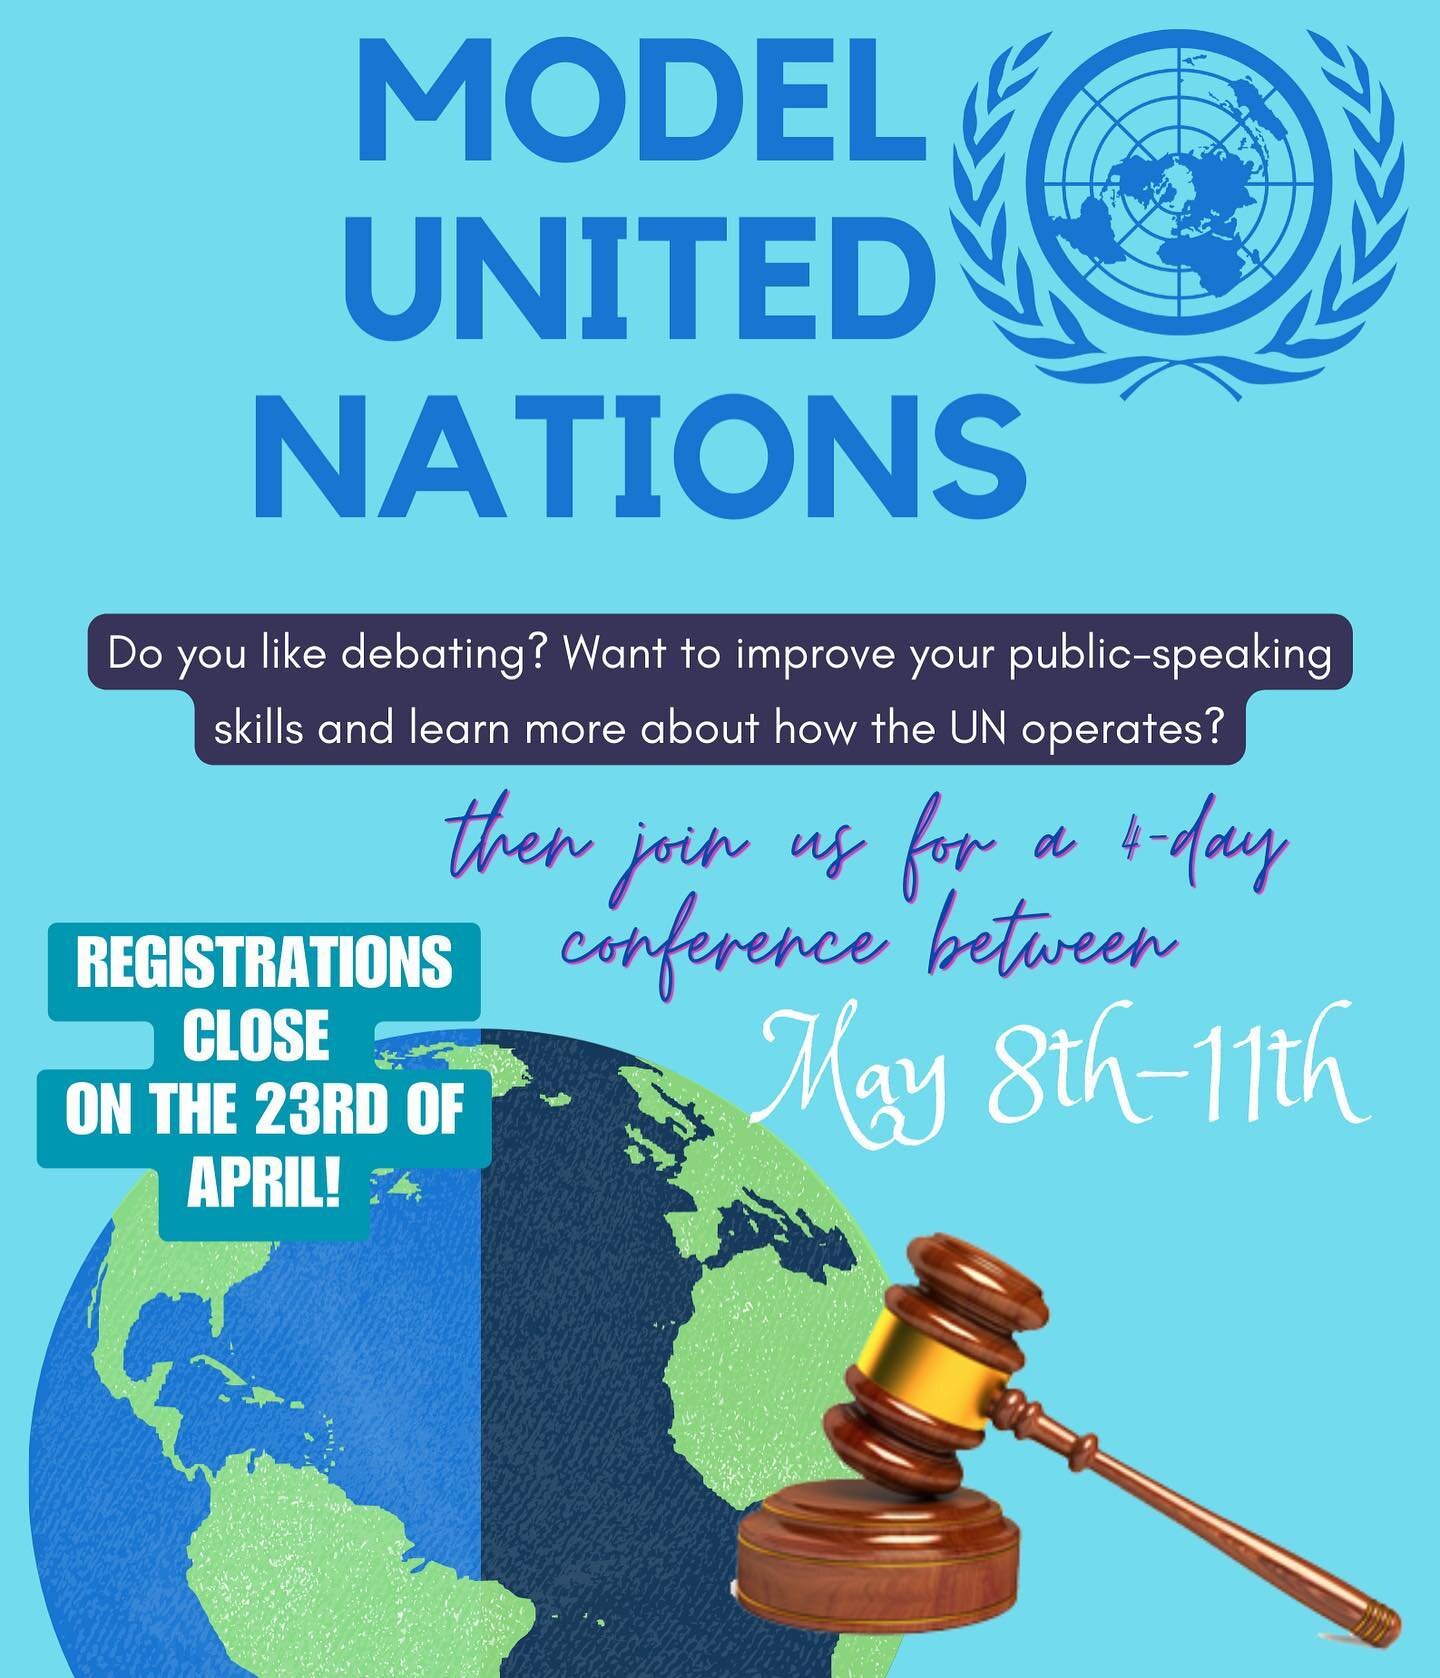 Are you interested in learning more about how the United Nations operate? Do you want to broaden your understanding of diplomacy and international relations? Then join PPE MUN 2023!👨&zwj;⚖️🧑&zwj;⚖️

Between May 8th-11th the Academic Committee is or